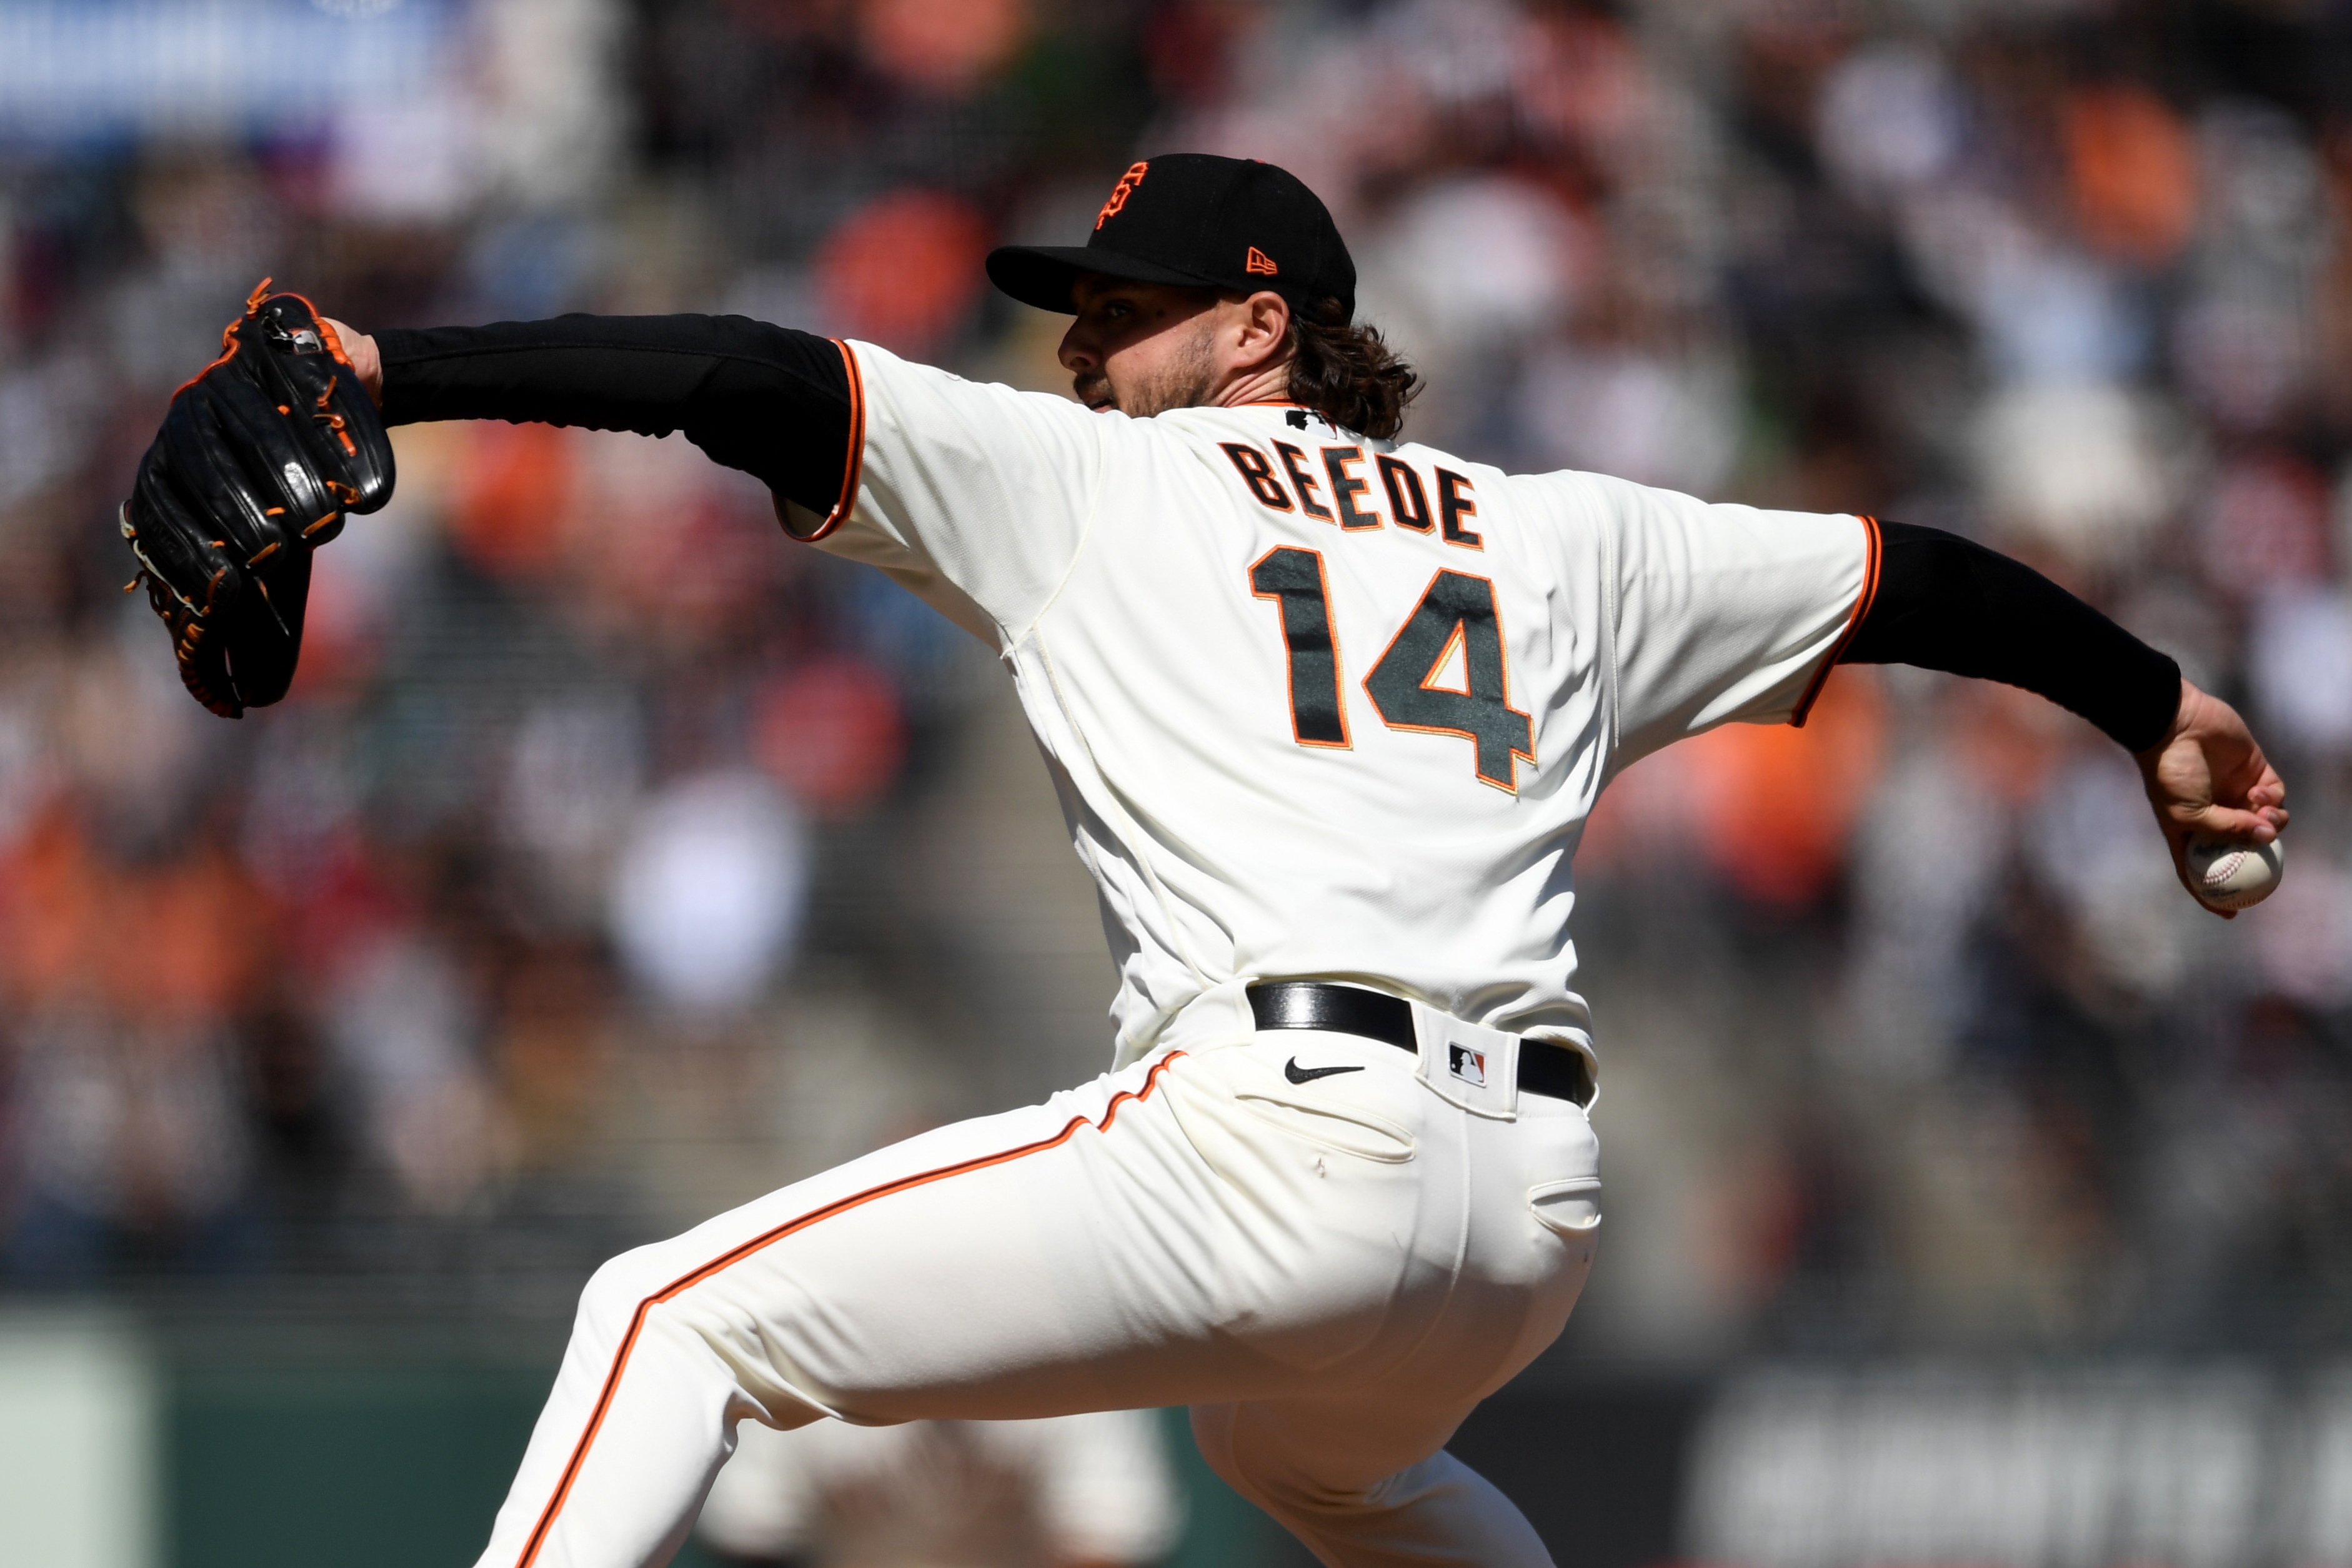 A photo of Tyler Beede, mid-throw